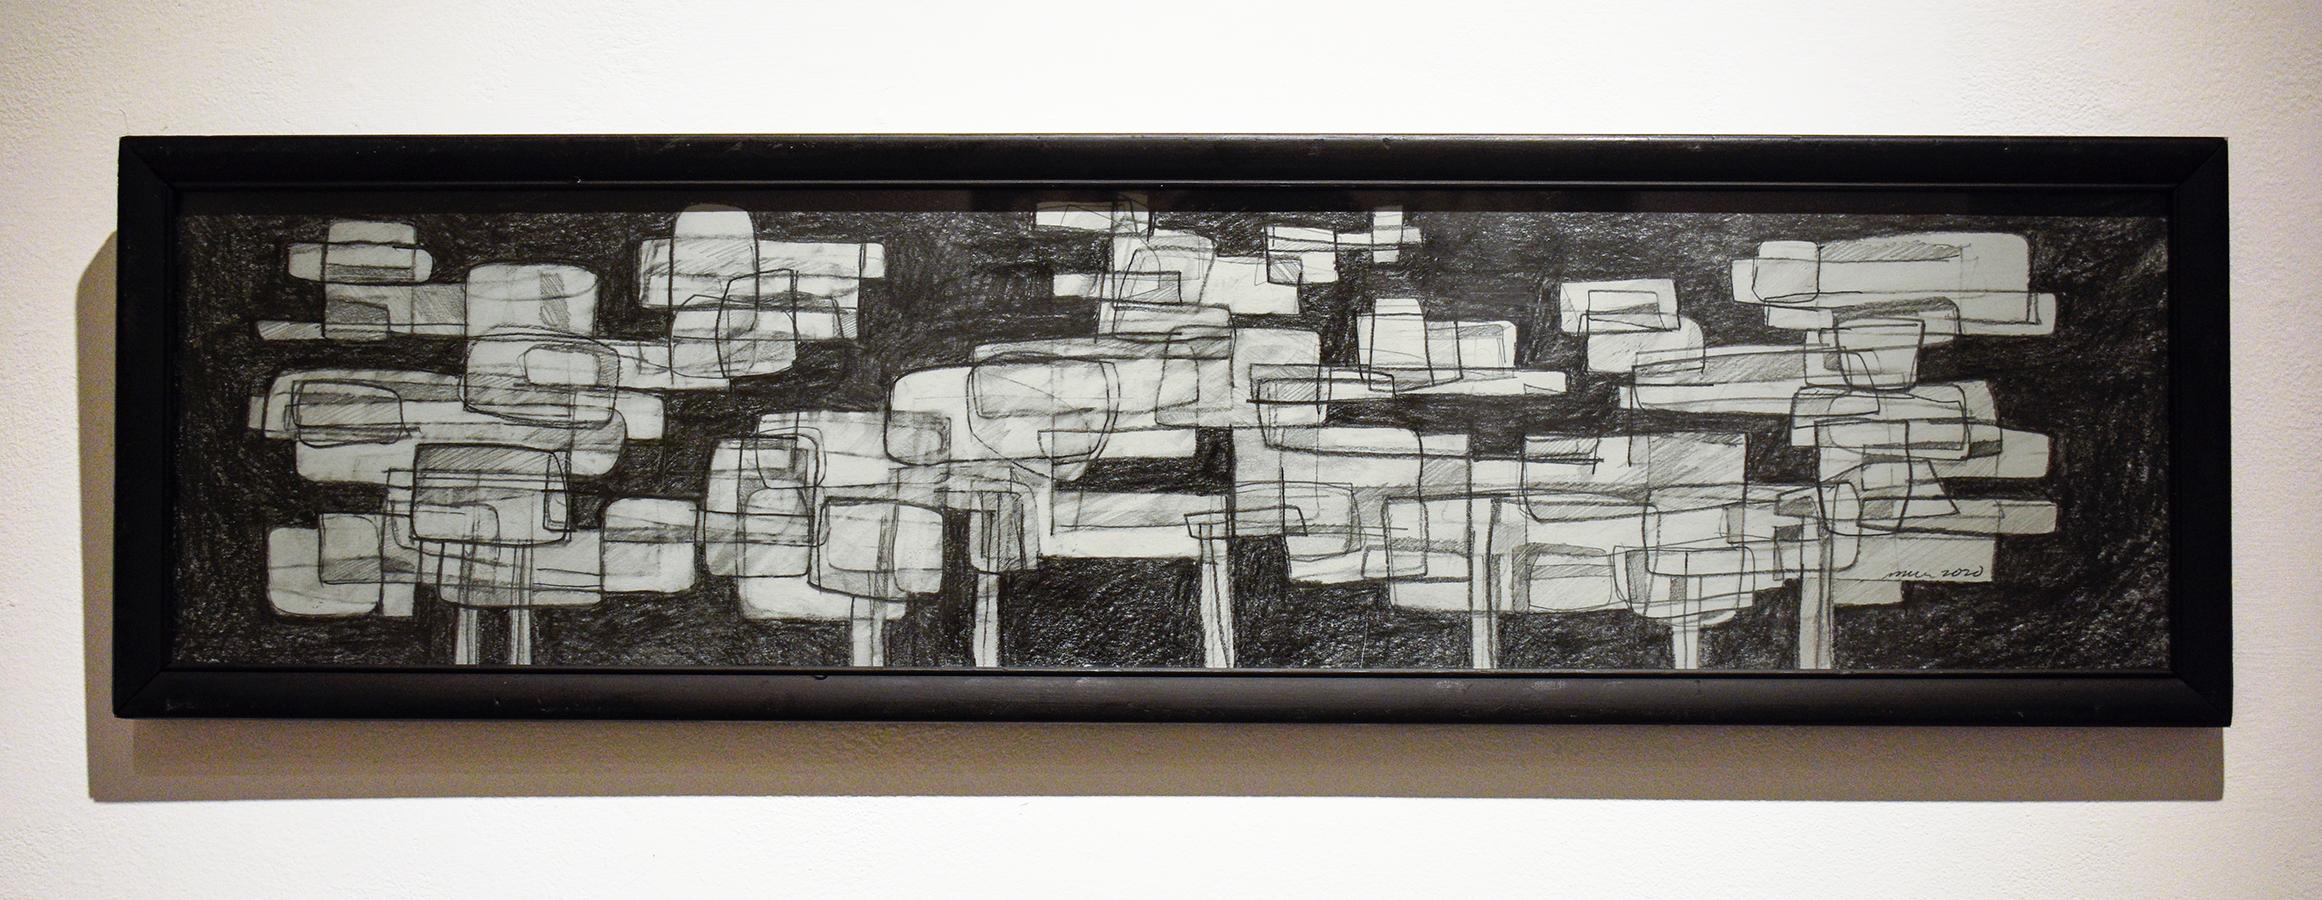 Waterlilies 25 (Abstract Black & White Graphite Drawing Inspired by Monet) - Art by David Dew Bruner